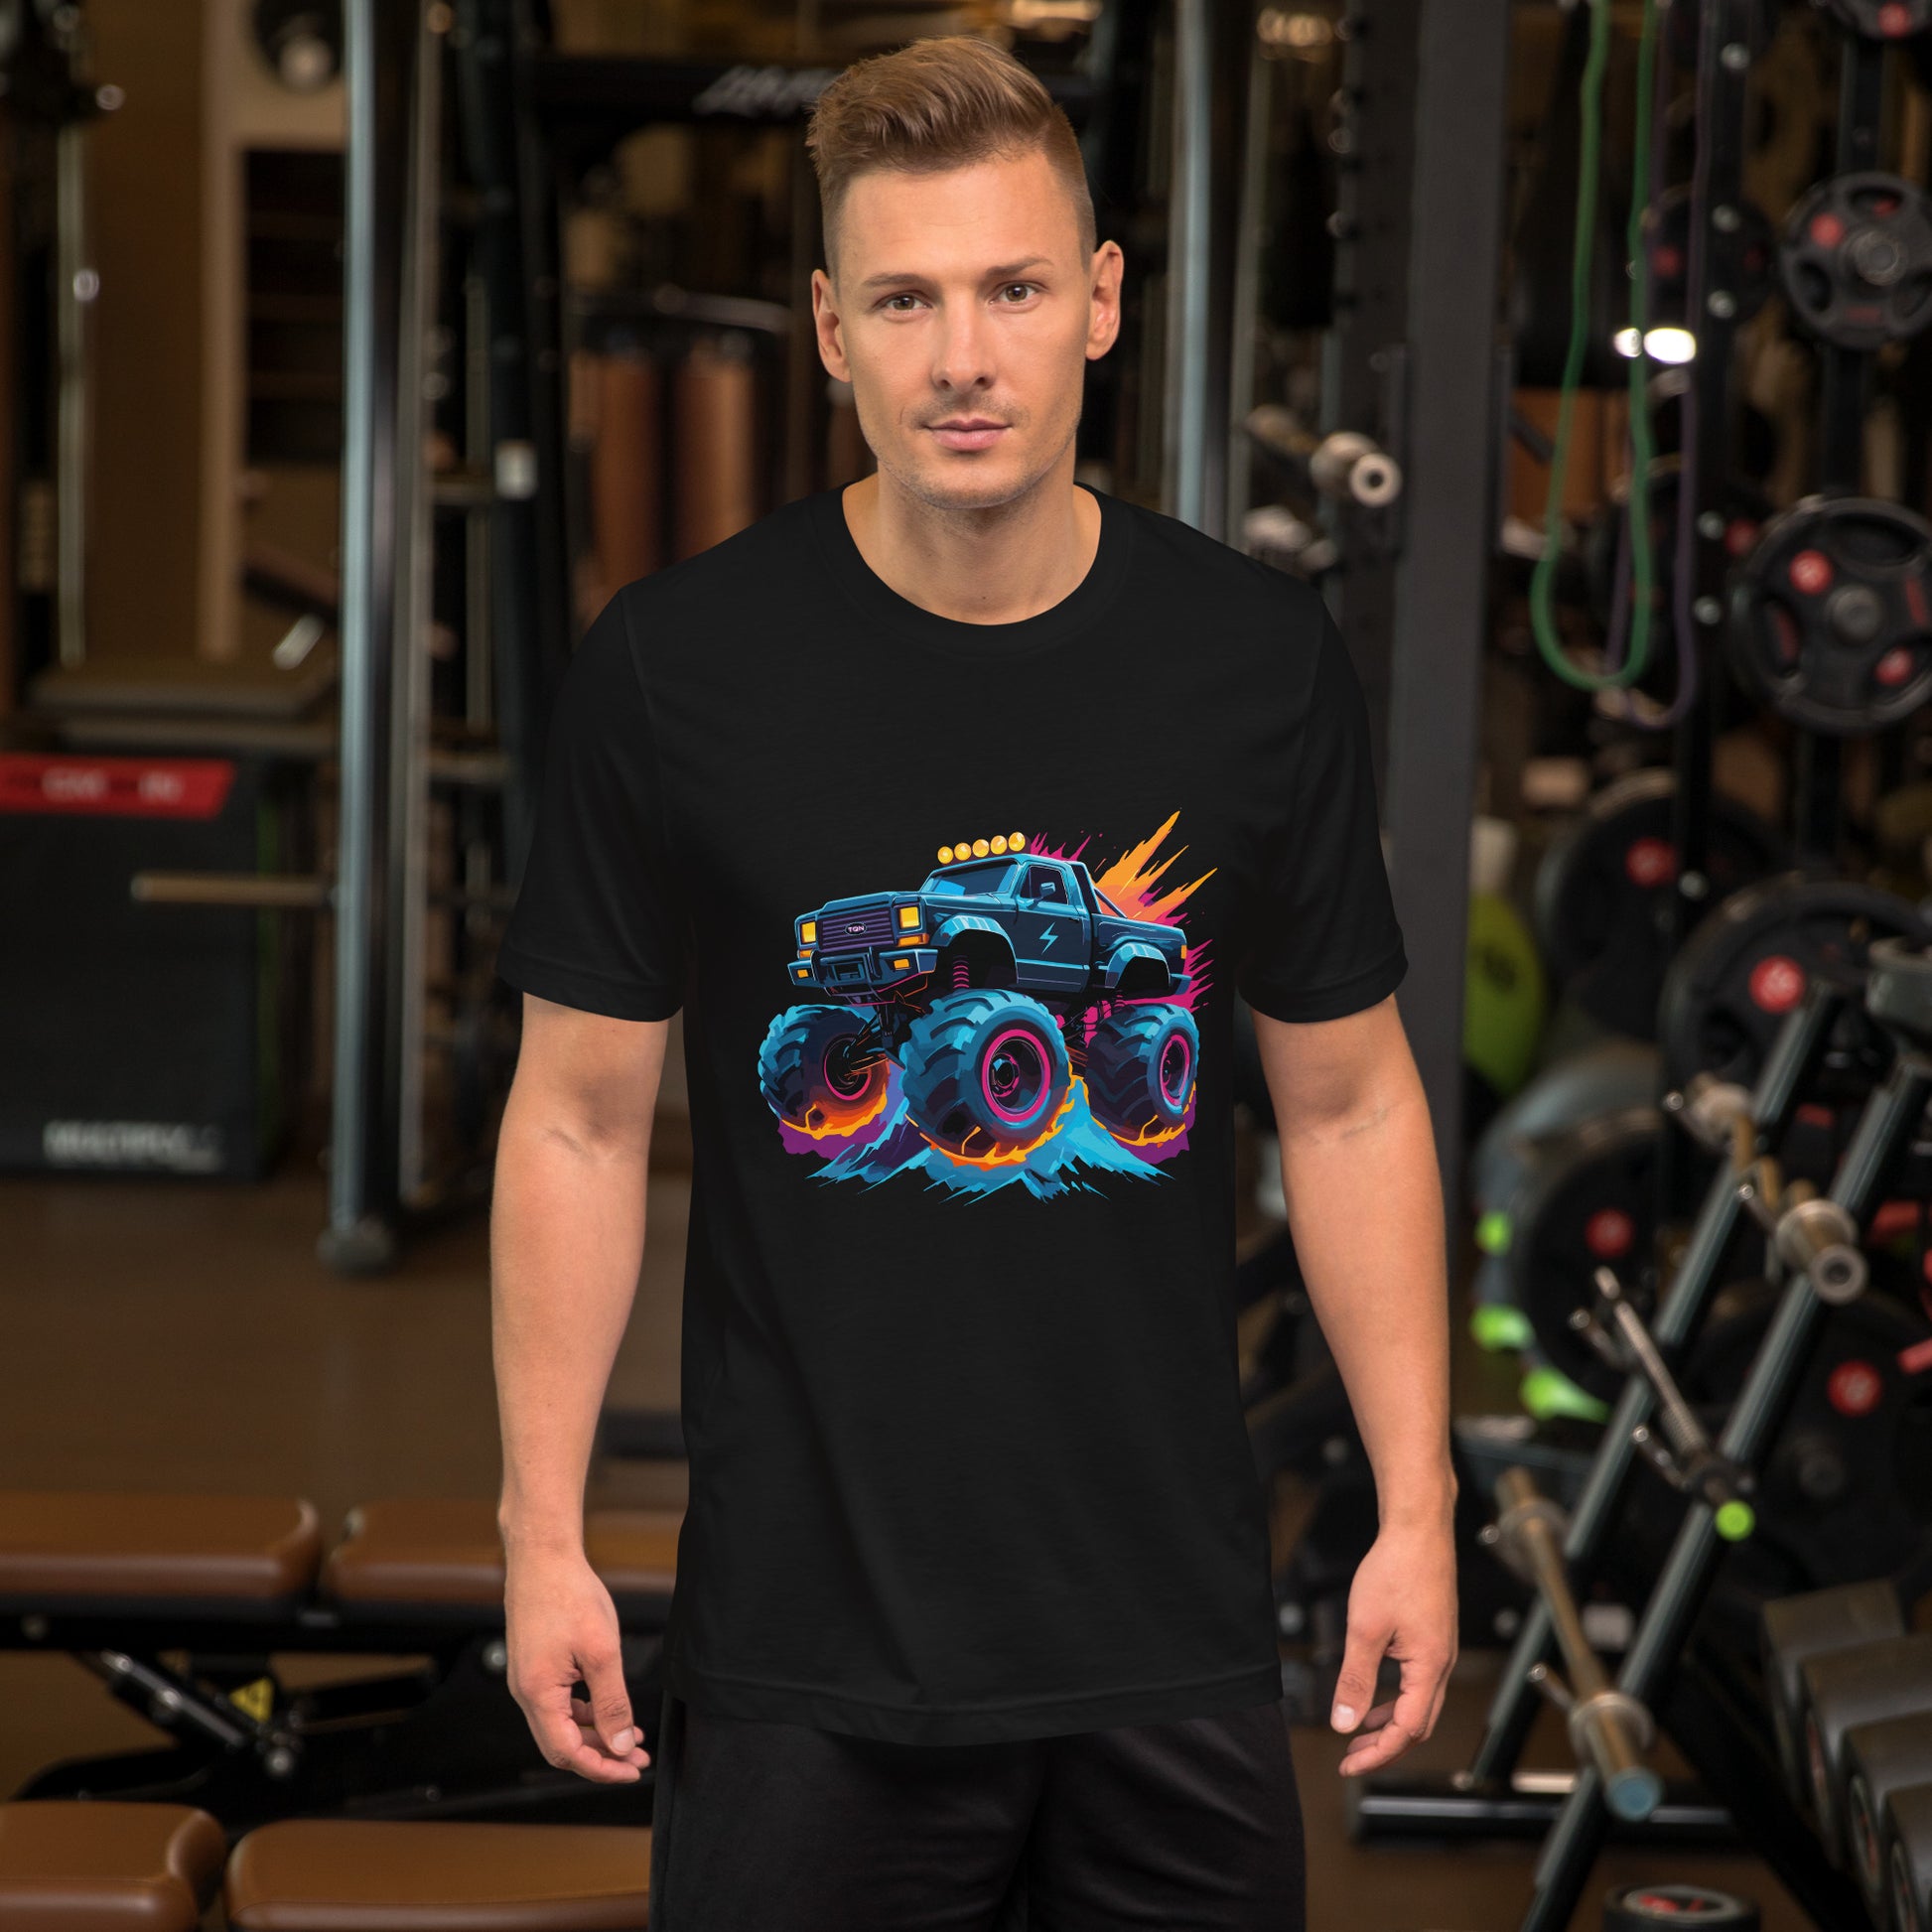 Neon Flying Monster Truck graphic on black T-shirt from the Radioactive collection